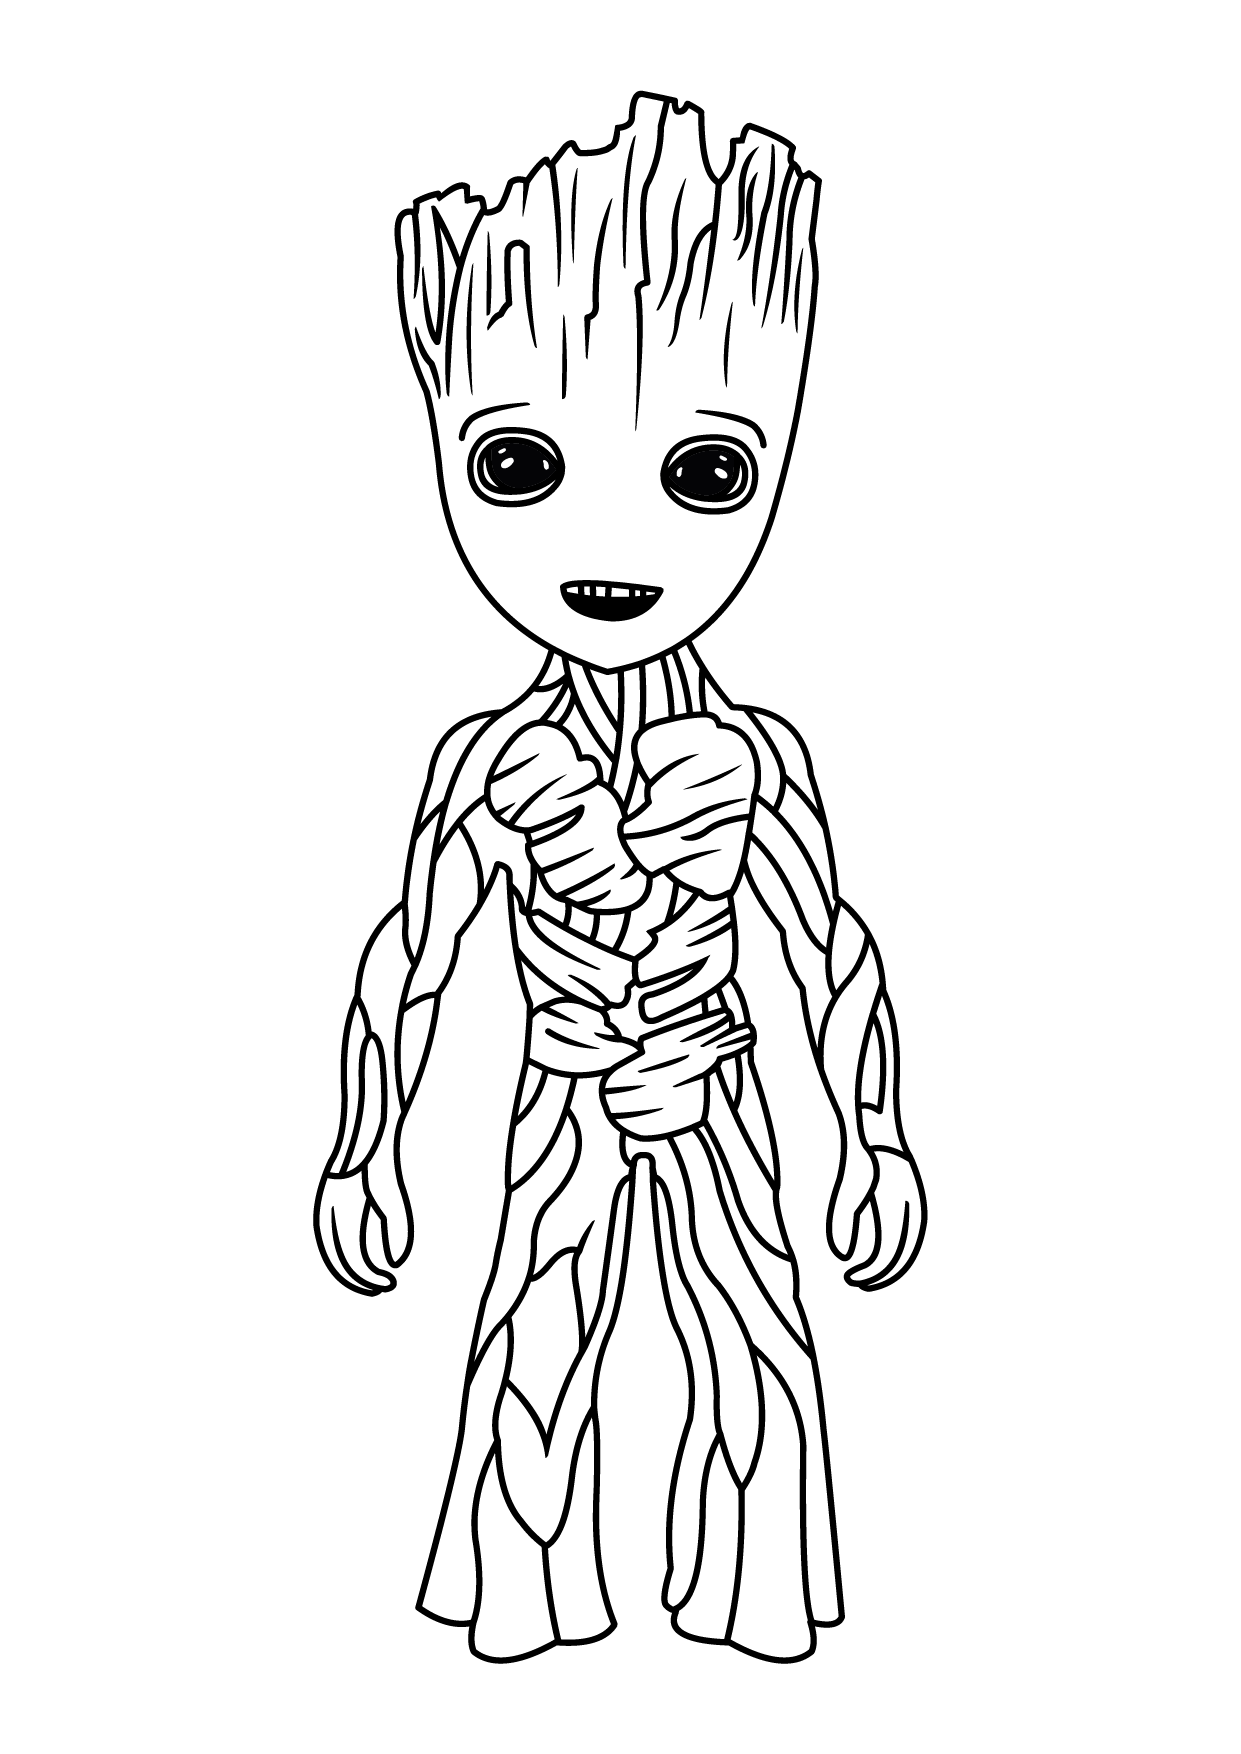 Baby Groot Coloring Page - Free Printable Coloring Pages ...